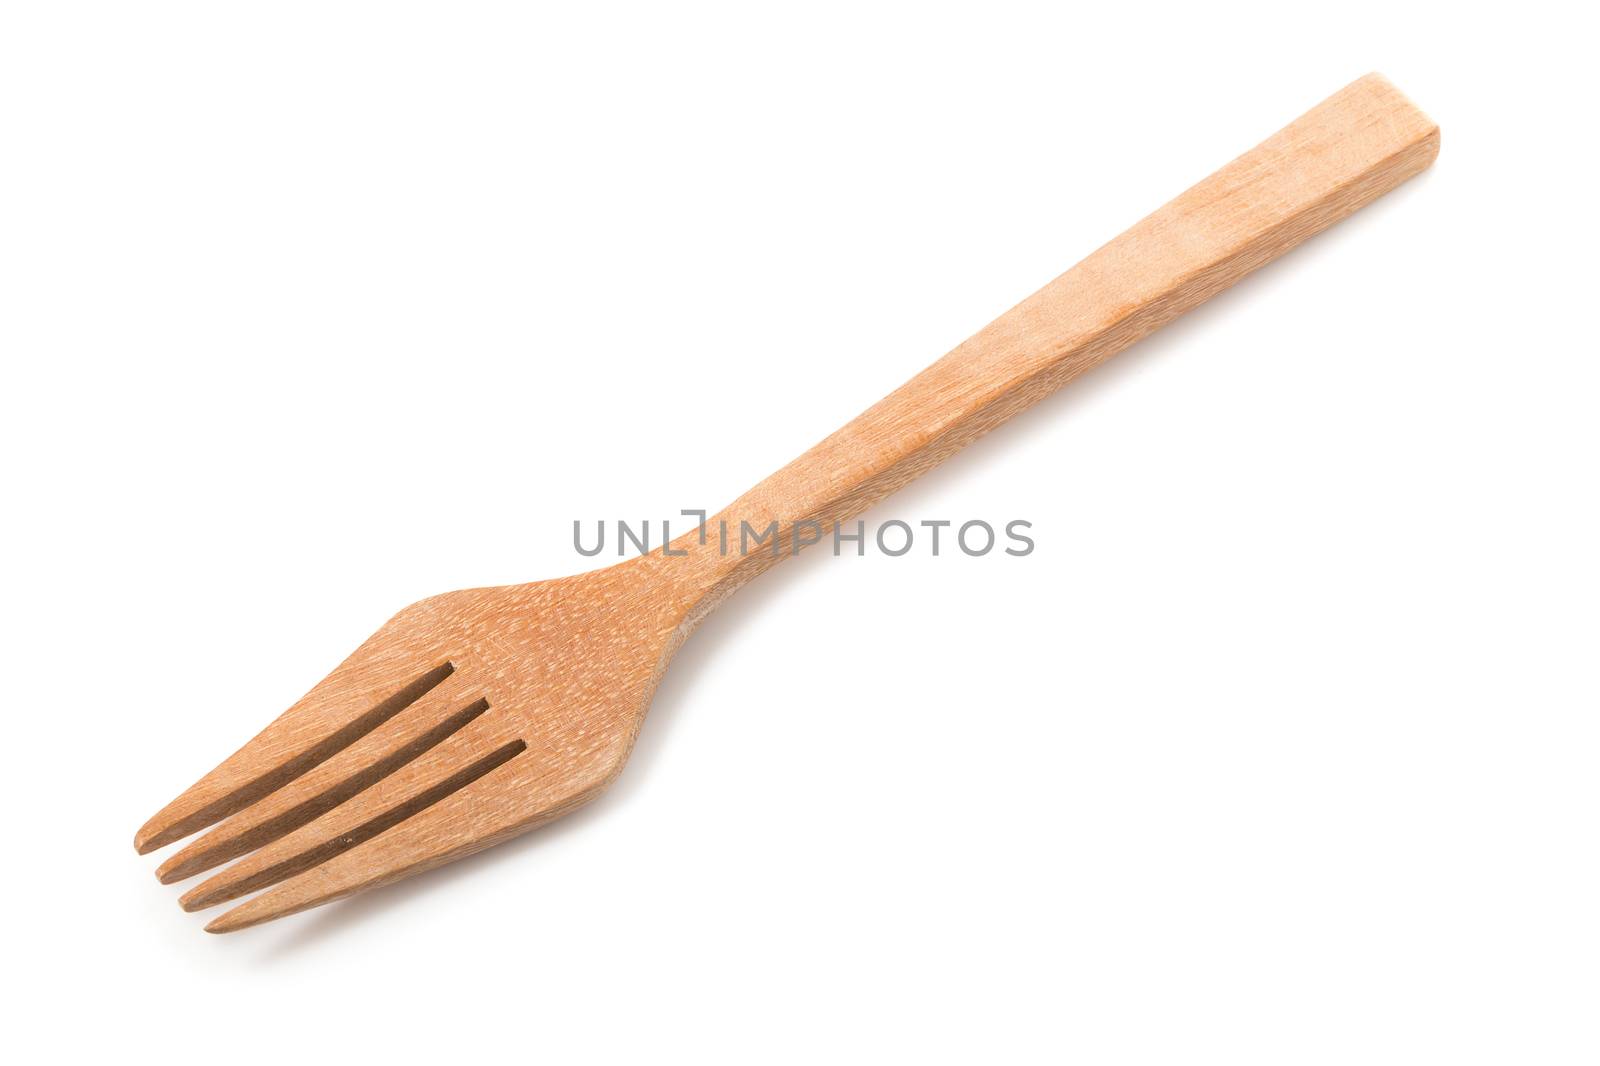 Wooden fork isolated on a white background by kaiskynet